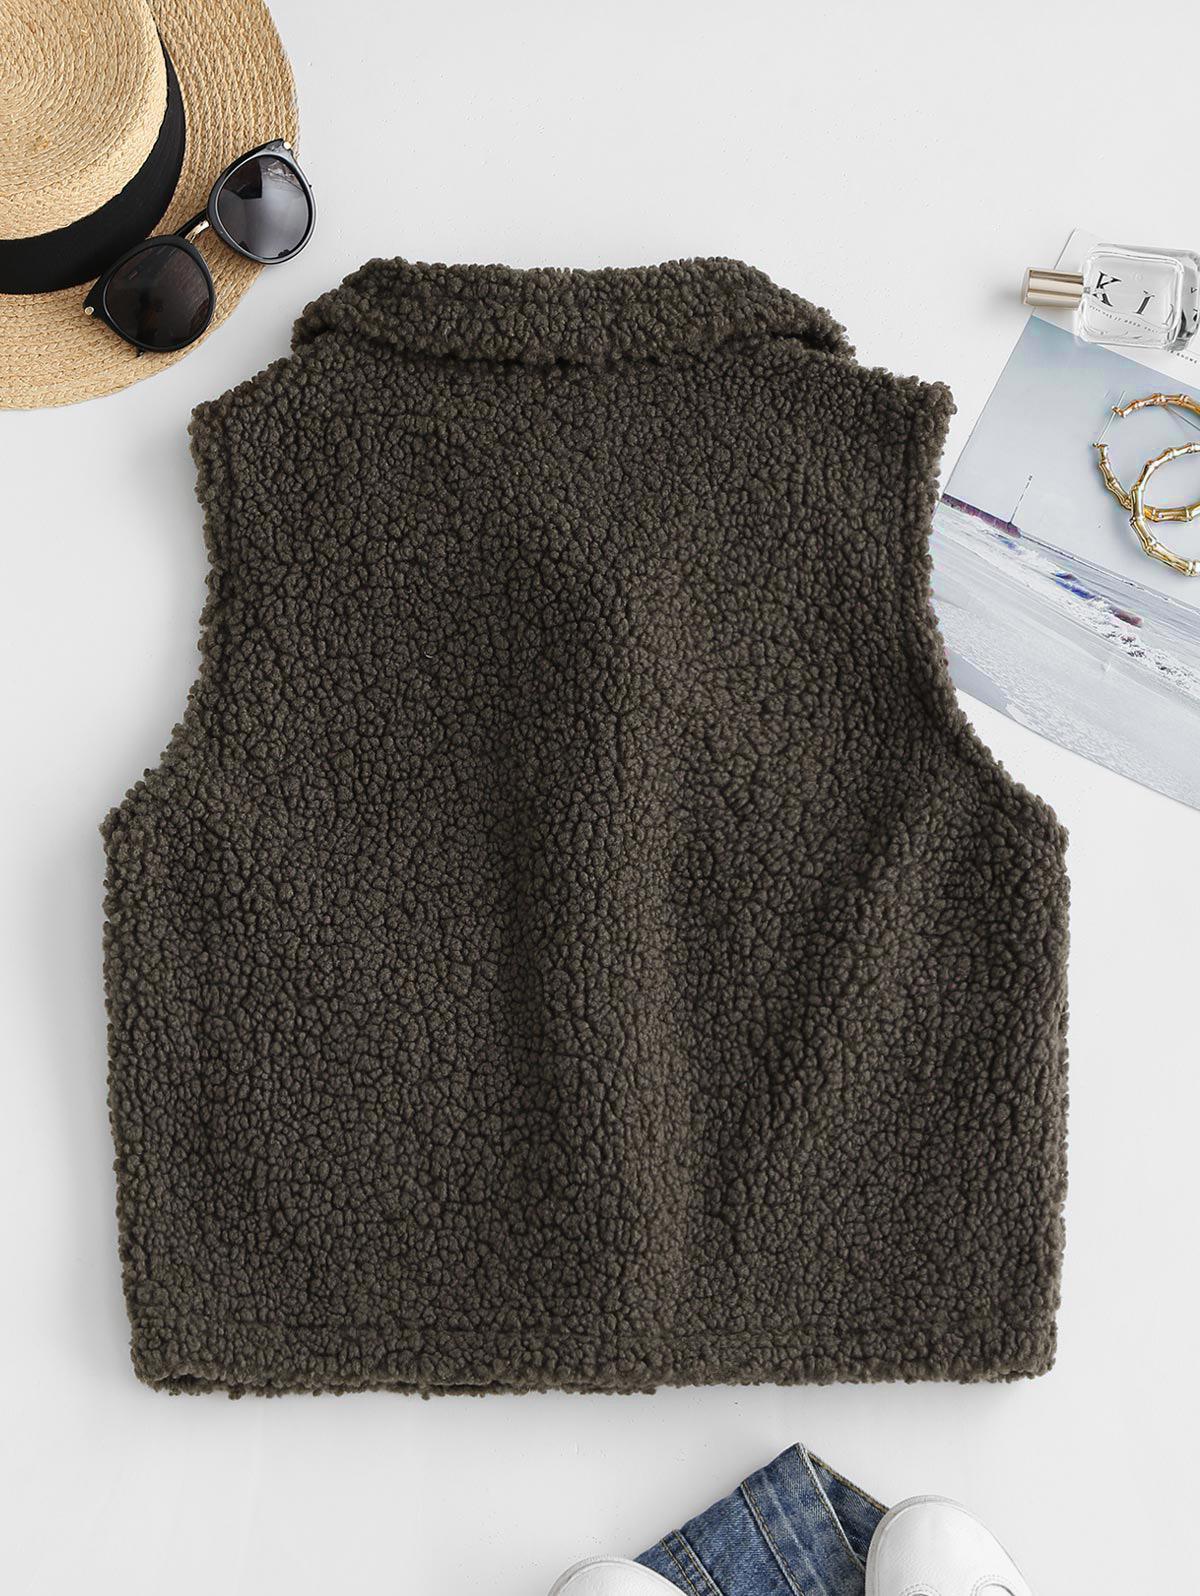 Brown Zaful Cotton Waistcoat Faux Fur Suede Insert Pocket Drawstring Waist Gilet in Deep Coffee Womens Mens Clothing Mens Jackets Waistcoats and gilets 